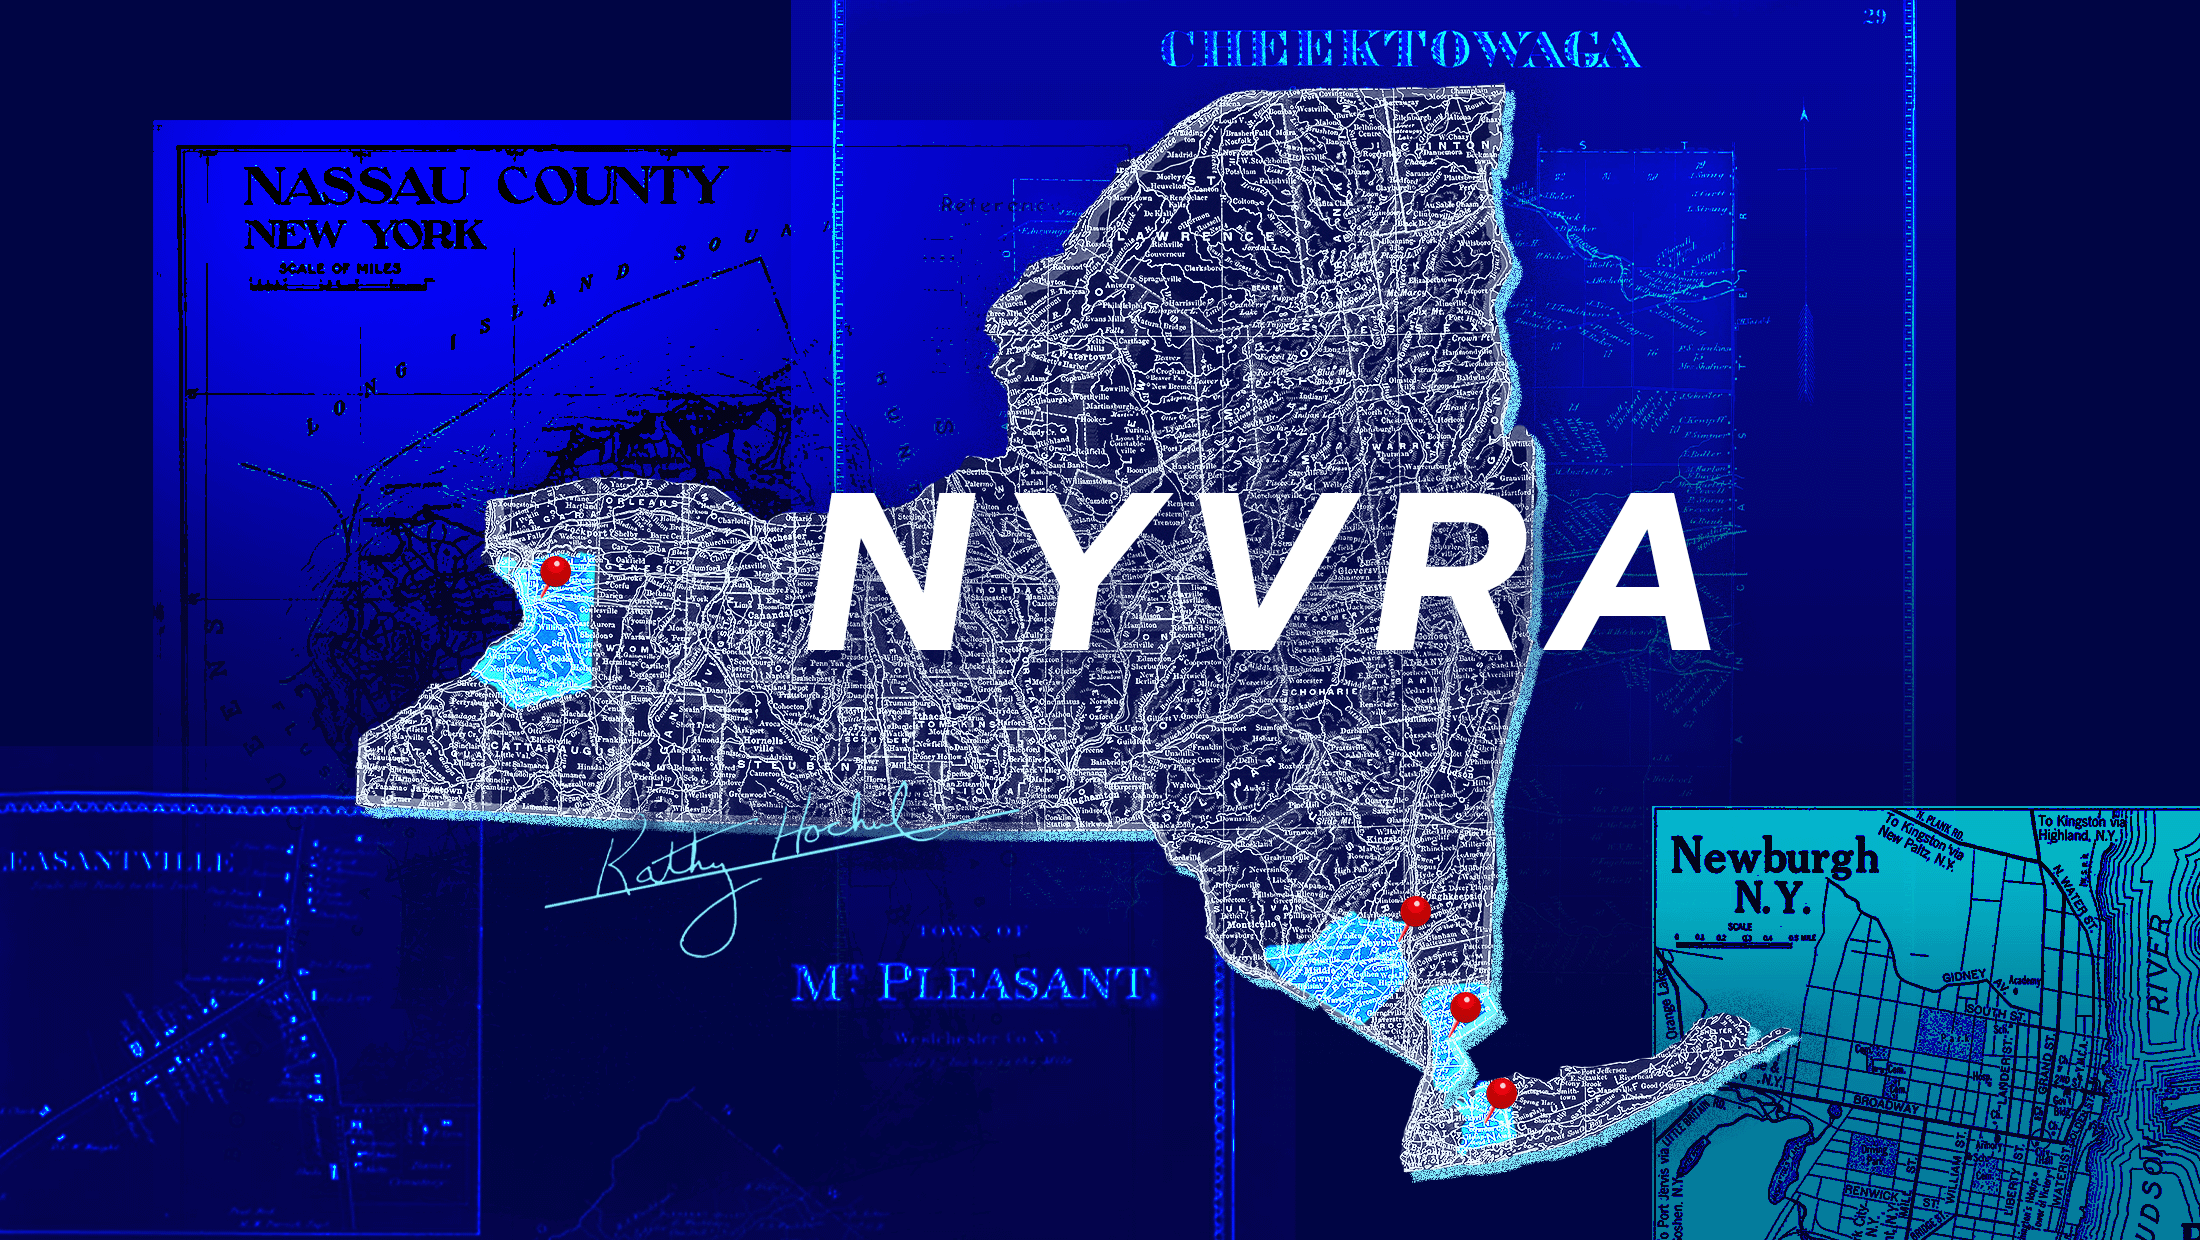 Map of New York over blue background. Overlaying the map are letters NYVRA in bold white lettering. Four areas of the map are shaded with light blue shading and inside each shaded area is a red pin marking a spot on the map. In the background there are partial maps of Nassau County, Cheektowaga, and Newburgh New York.